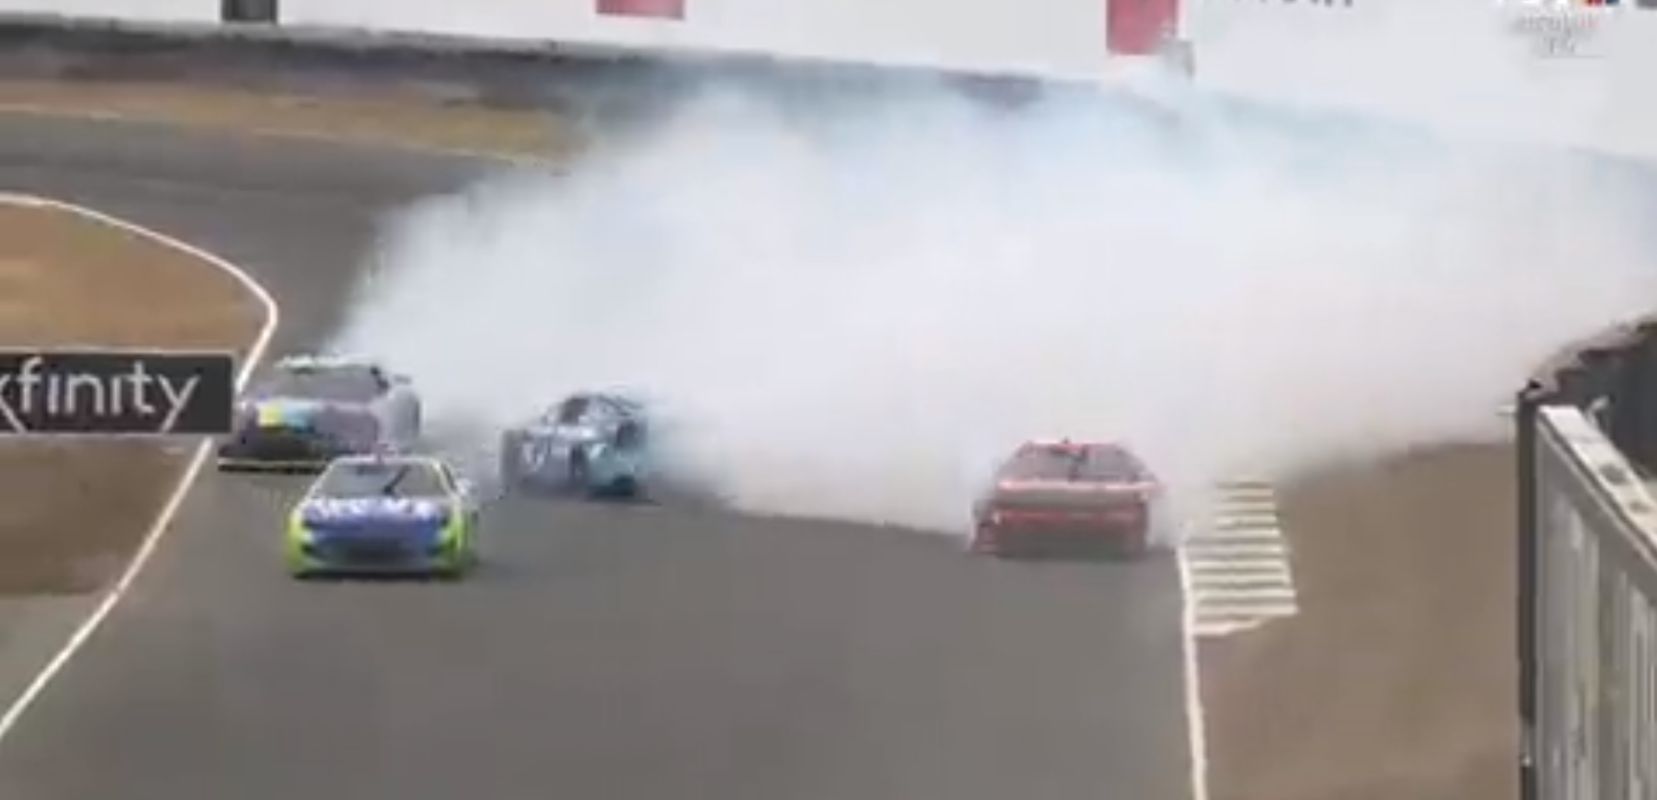 Fortunately, we were lucky that a huge crash did not occur after the massive smoke cover created by Reddick's car.